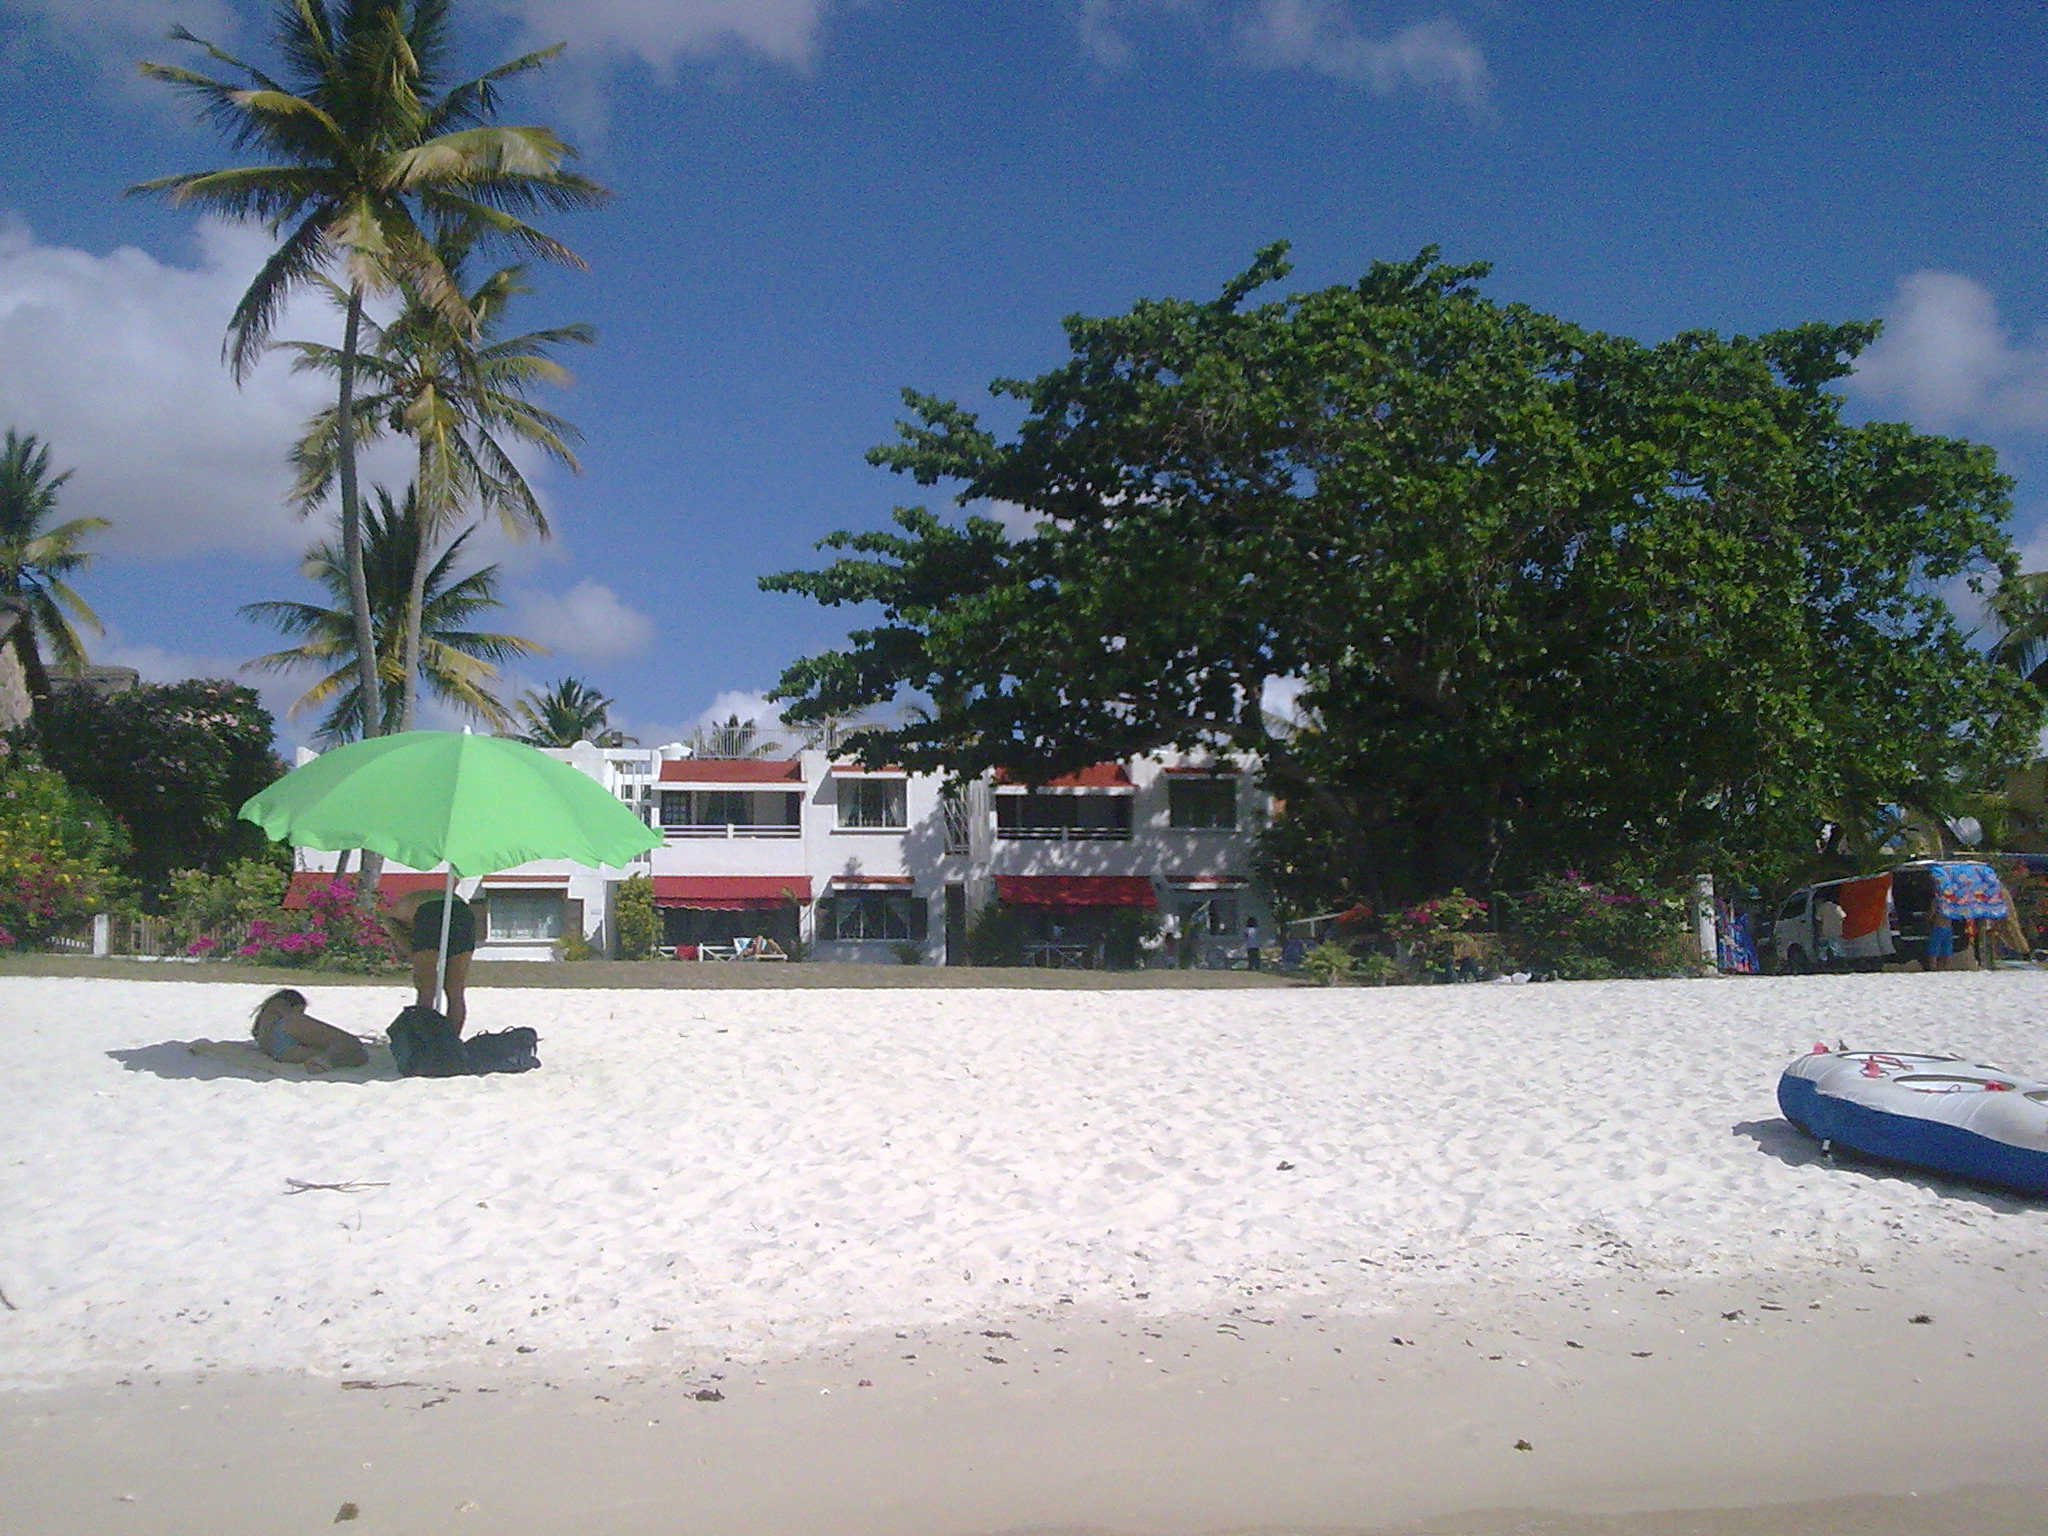 Bungalow straight on the beach of Trou Aux Biches.